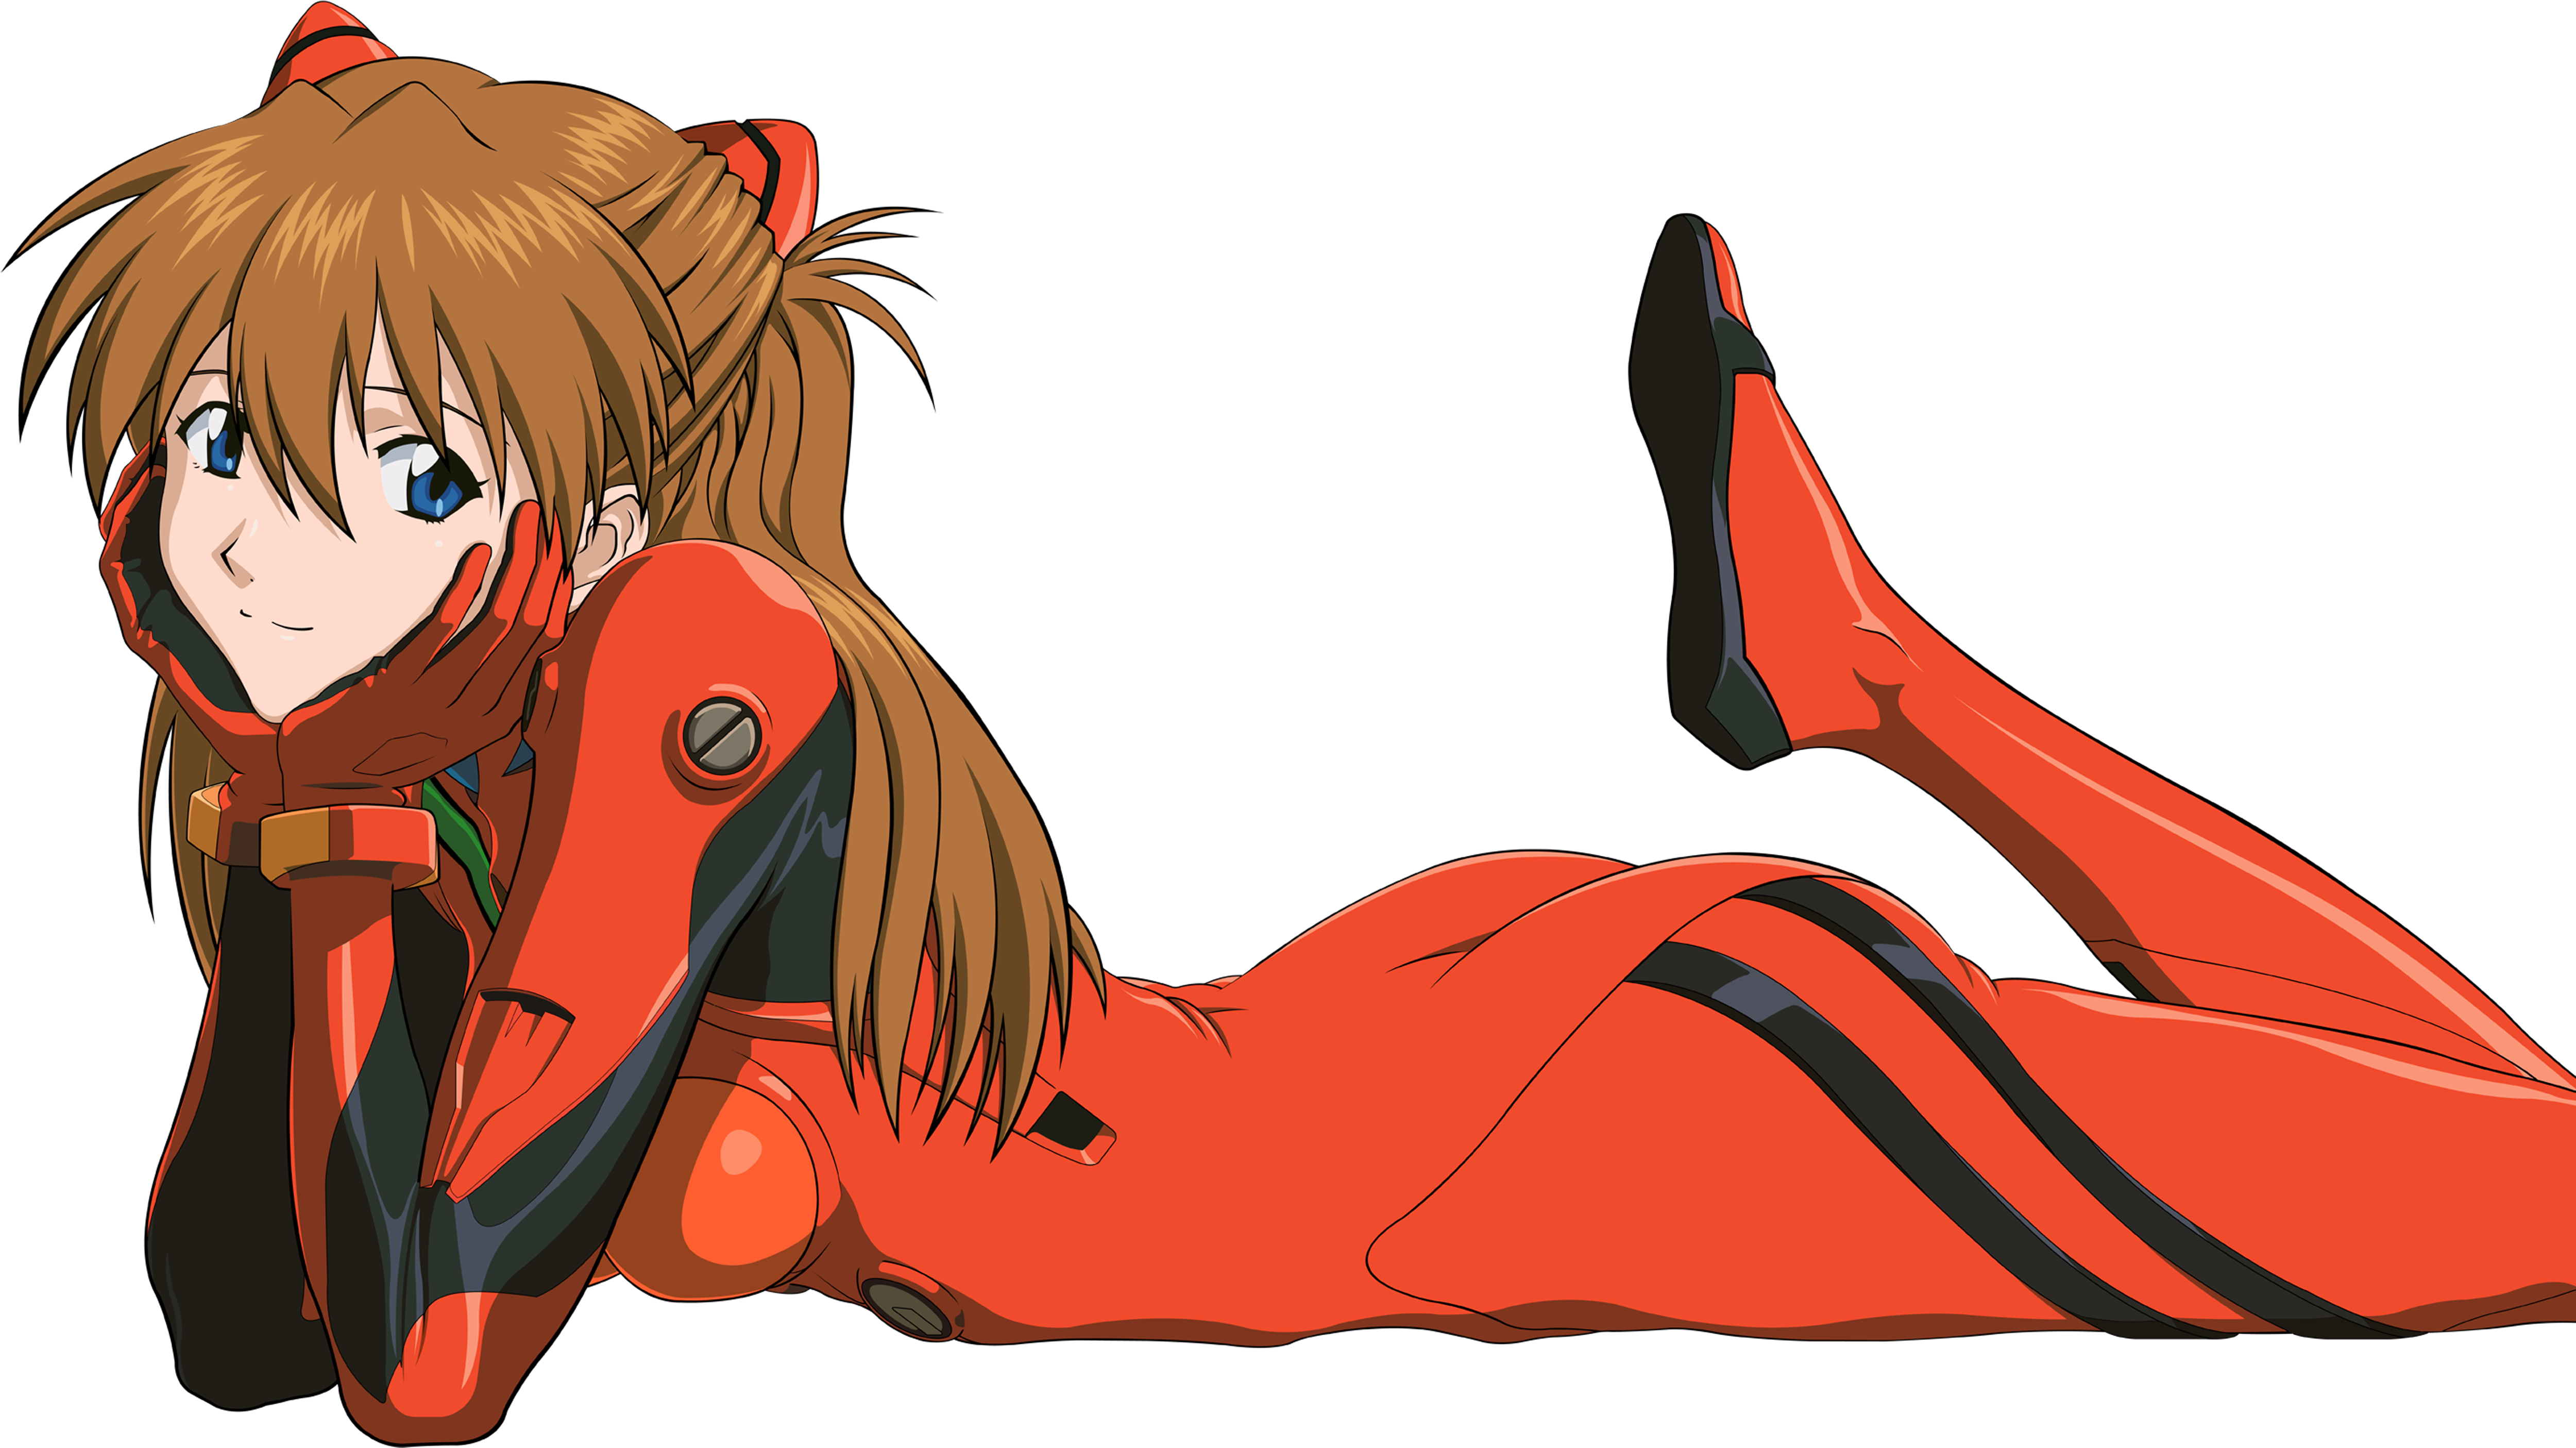 Cartoon A Cartoon Of A Woman In A Orange Outfit Lying On Her Stomach PNG